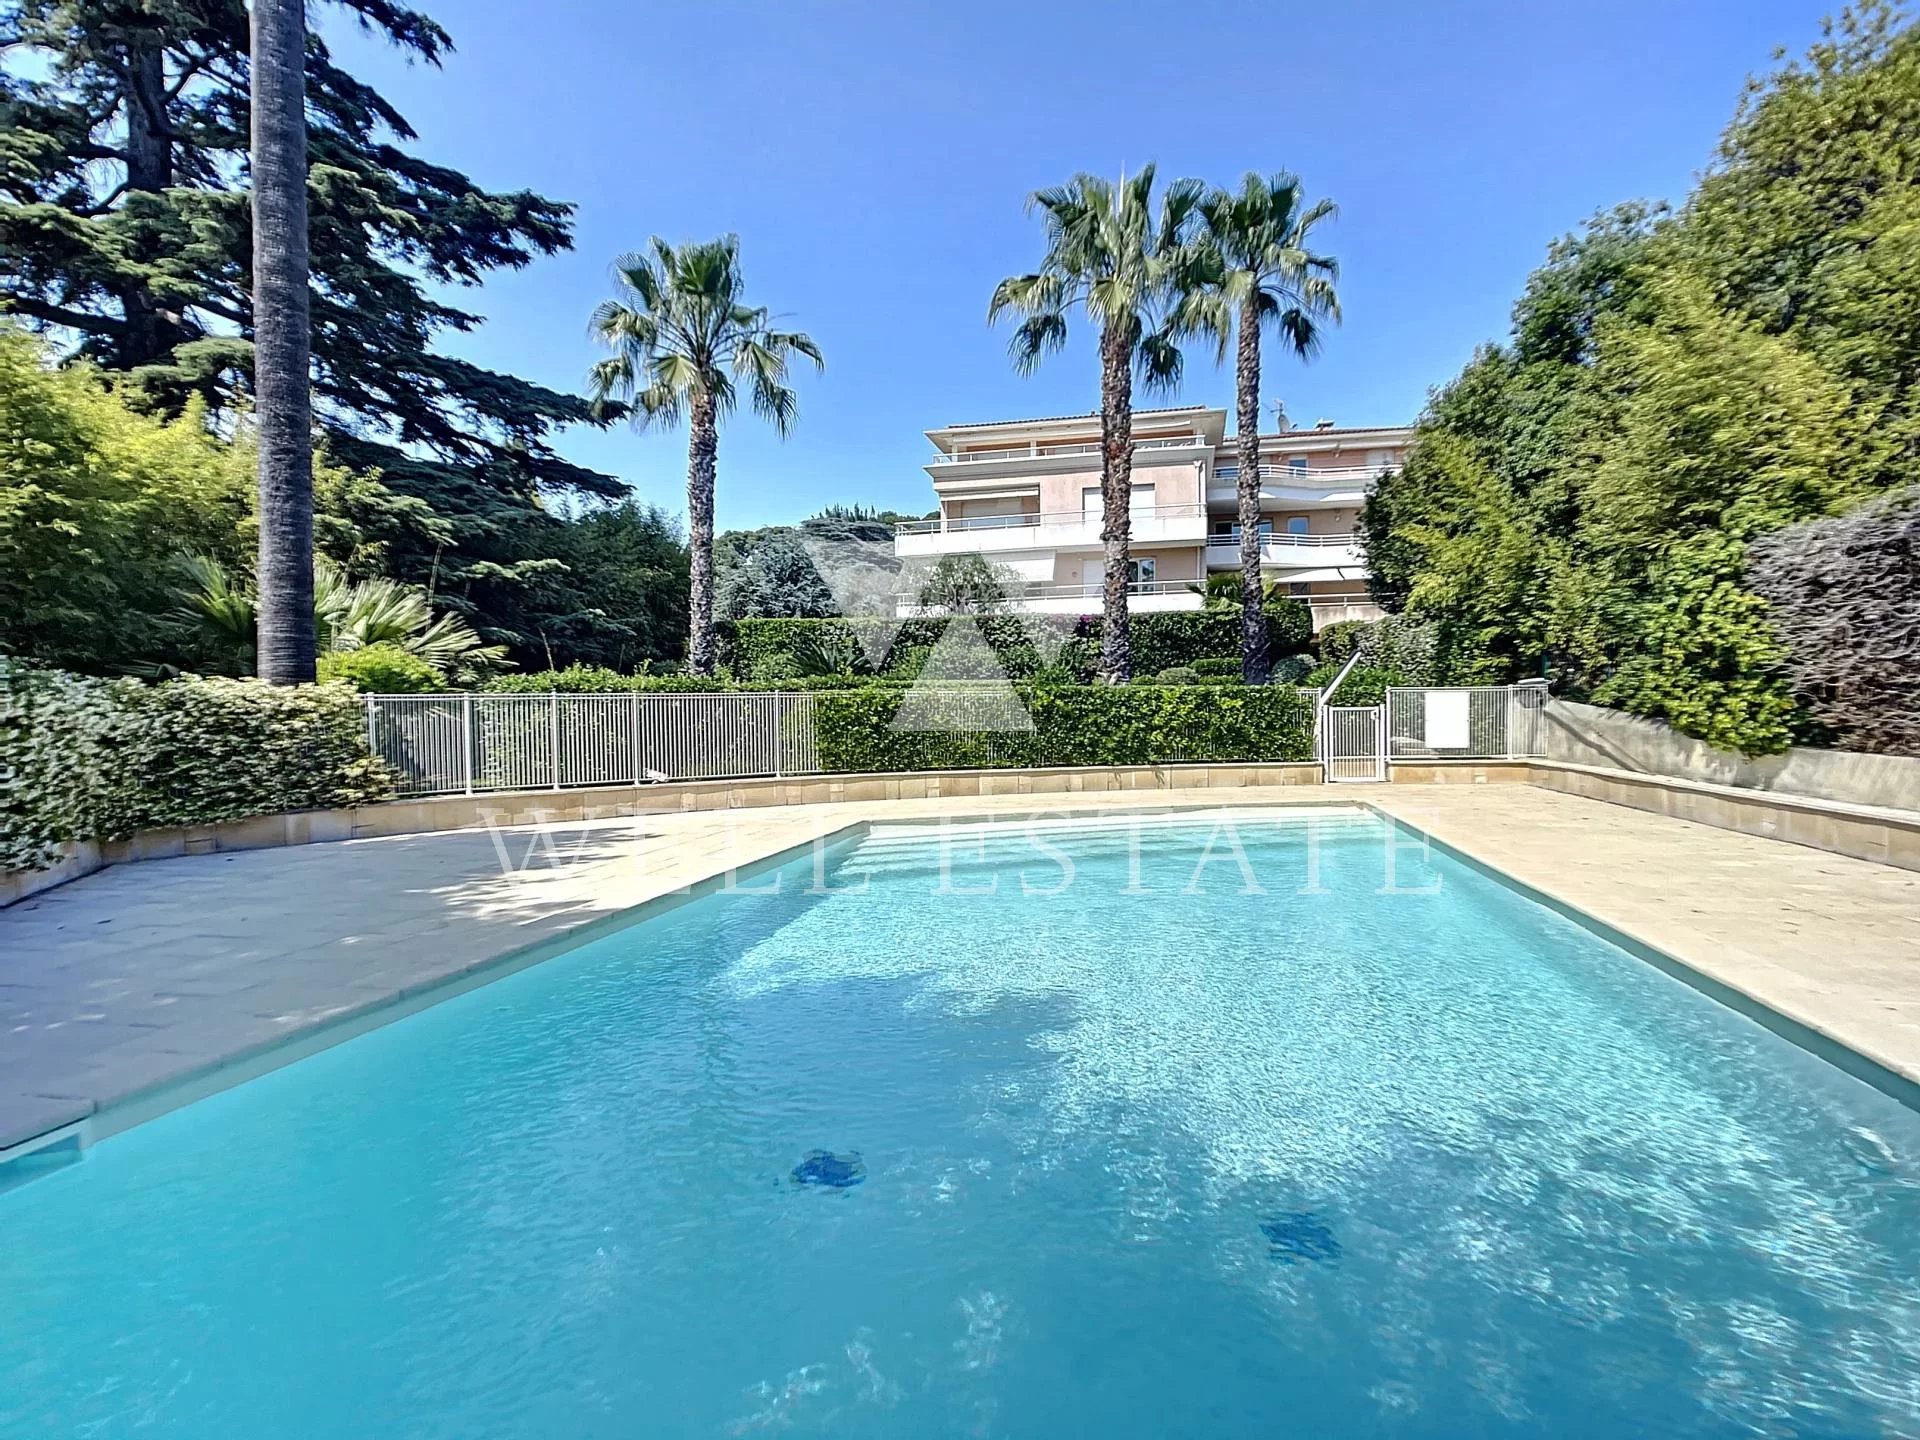 CANNES OXFORD NICE 3 BEDROOM APARTMENT 90M2 WITH SWIMMING POOL